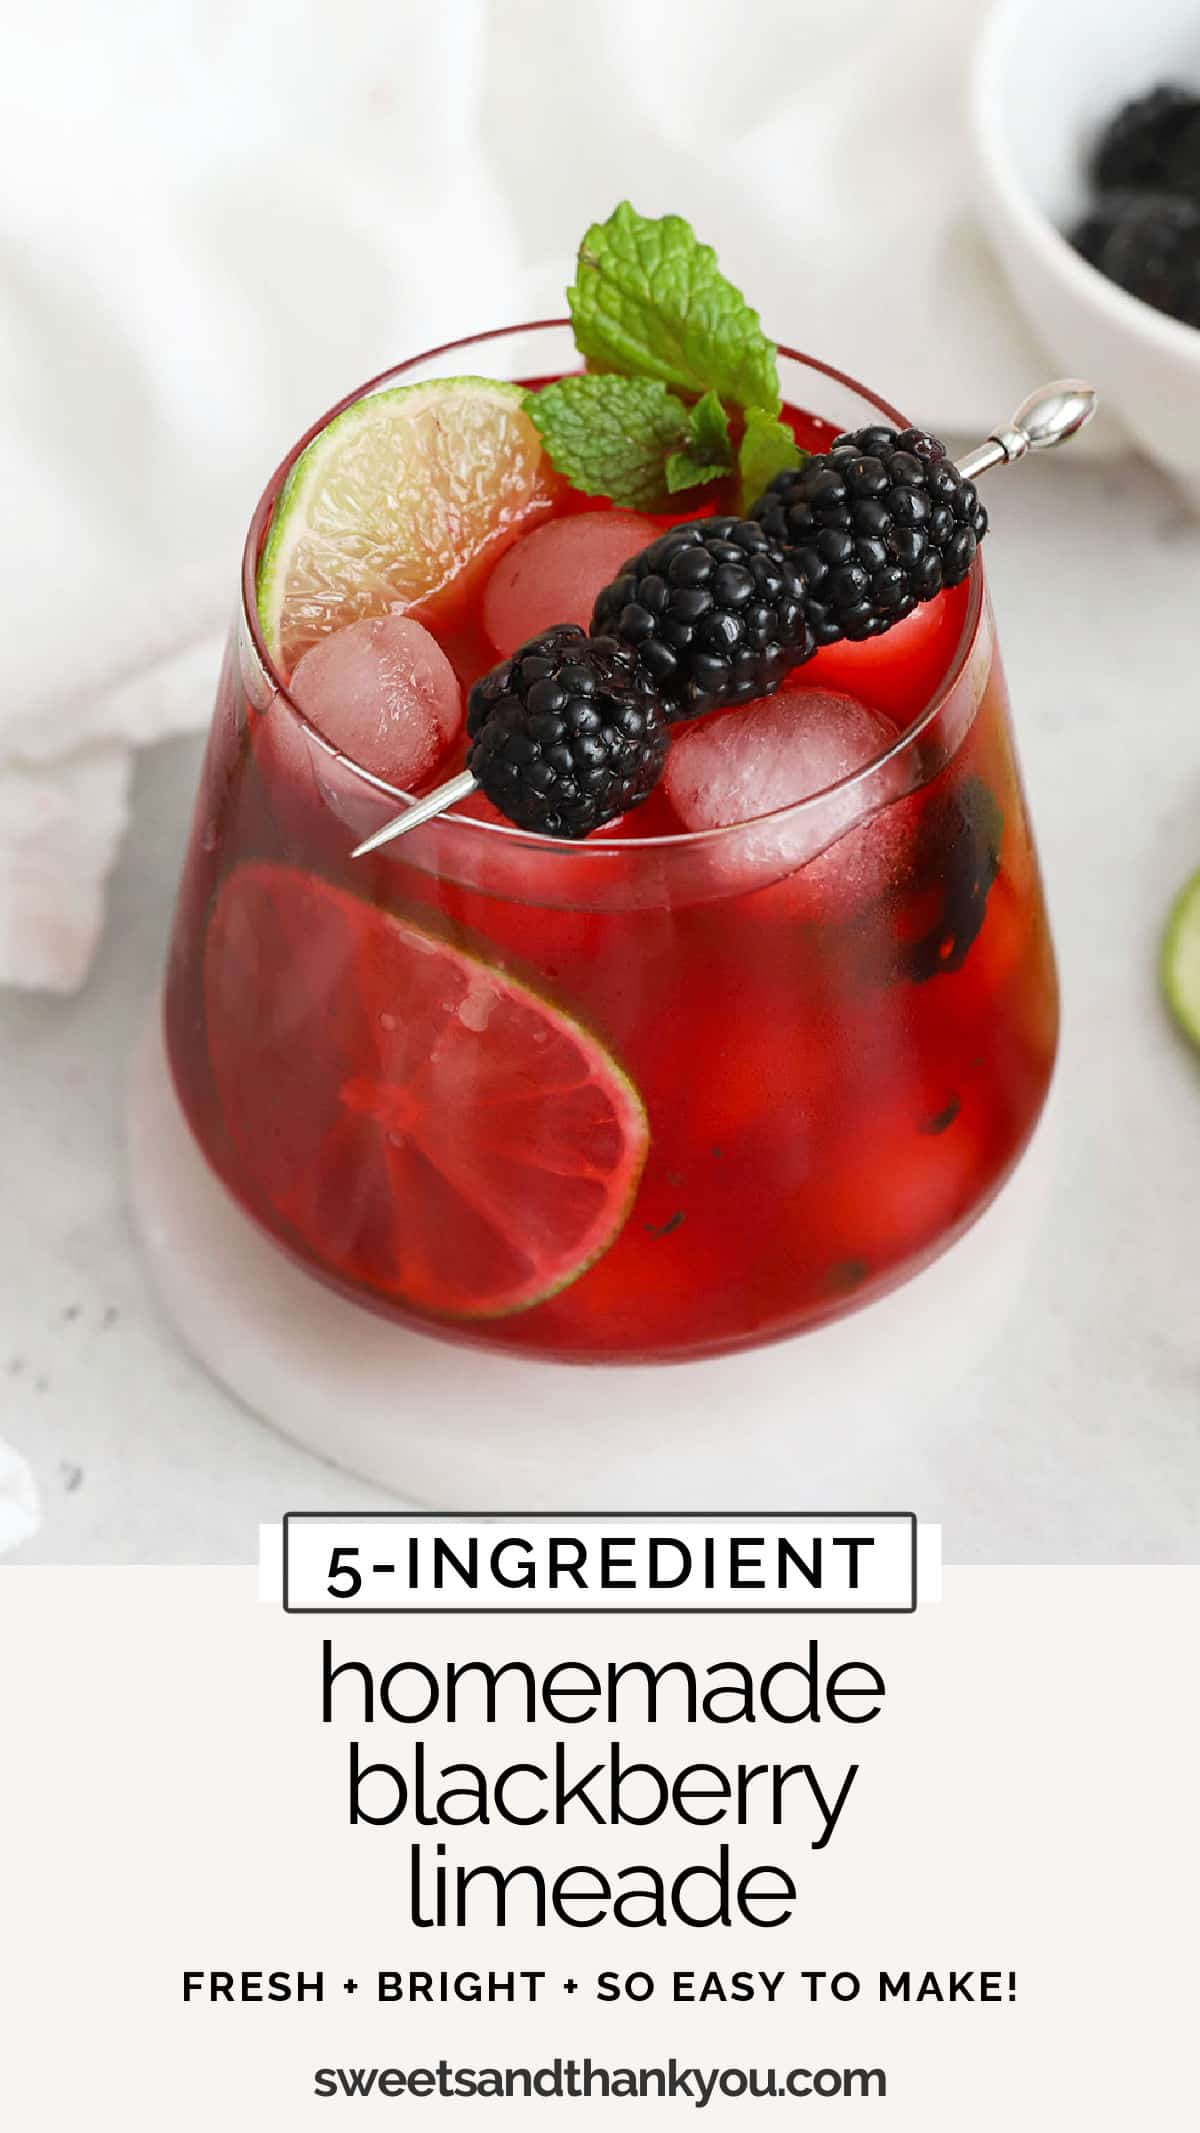 Our easy Blackberry Limeade recipe is the perfect drink to cool off with. You only need 5 ingredients to get started! / blackberry lemonade / homemade blackberry limeade / summer drink / blackberry mocktail / blackberry mojito mocktail / virgin blackberry mojito / 5 ingredient blackberry limeade / berry limeade / spring drink / summer mocktail recipe / blackberry drinks / blackberry recipe / blackberry mocktail recipe / 